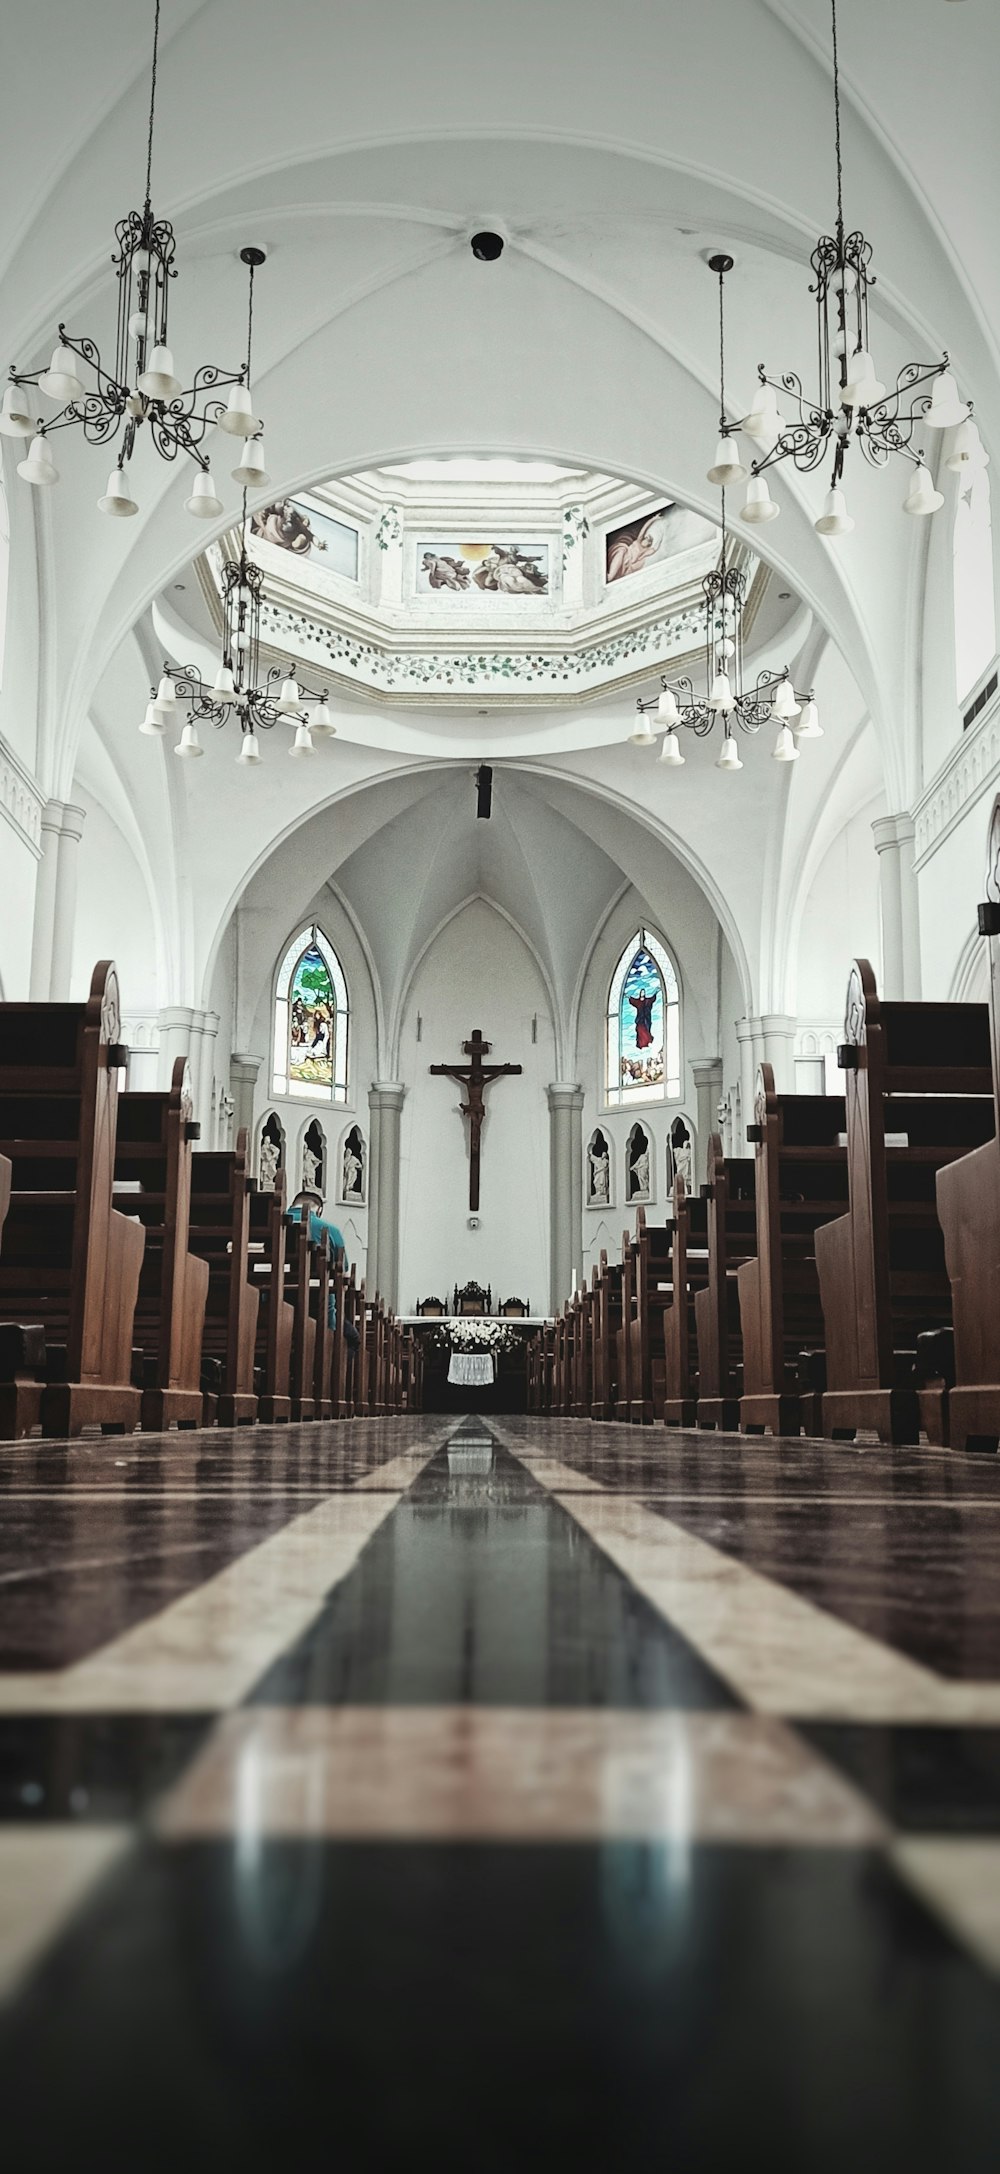 architectural photography of church interior view